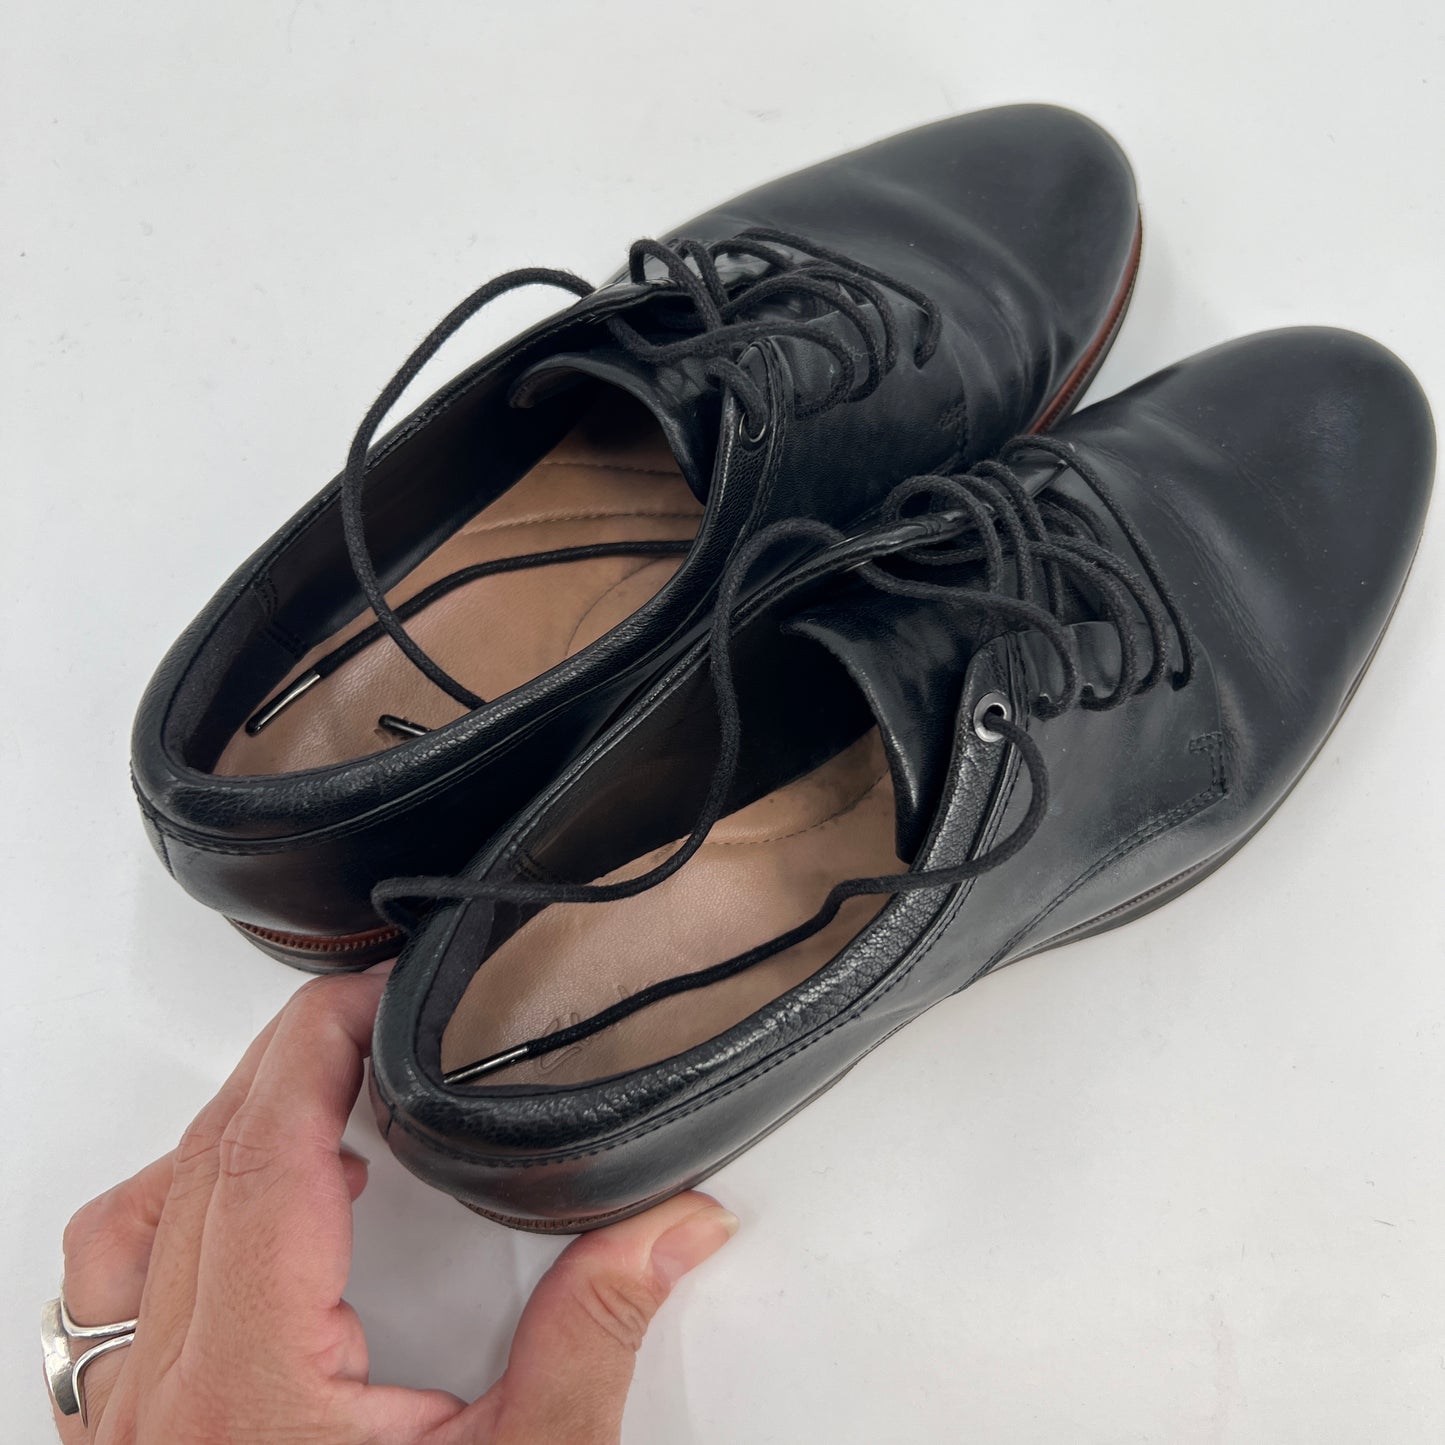 Clarks Leather Lace Up Shoes 7US